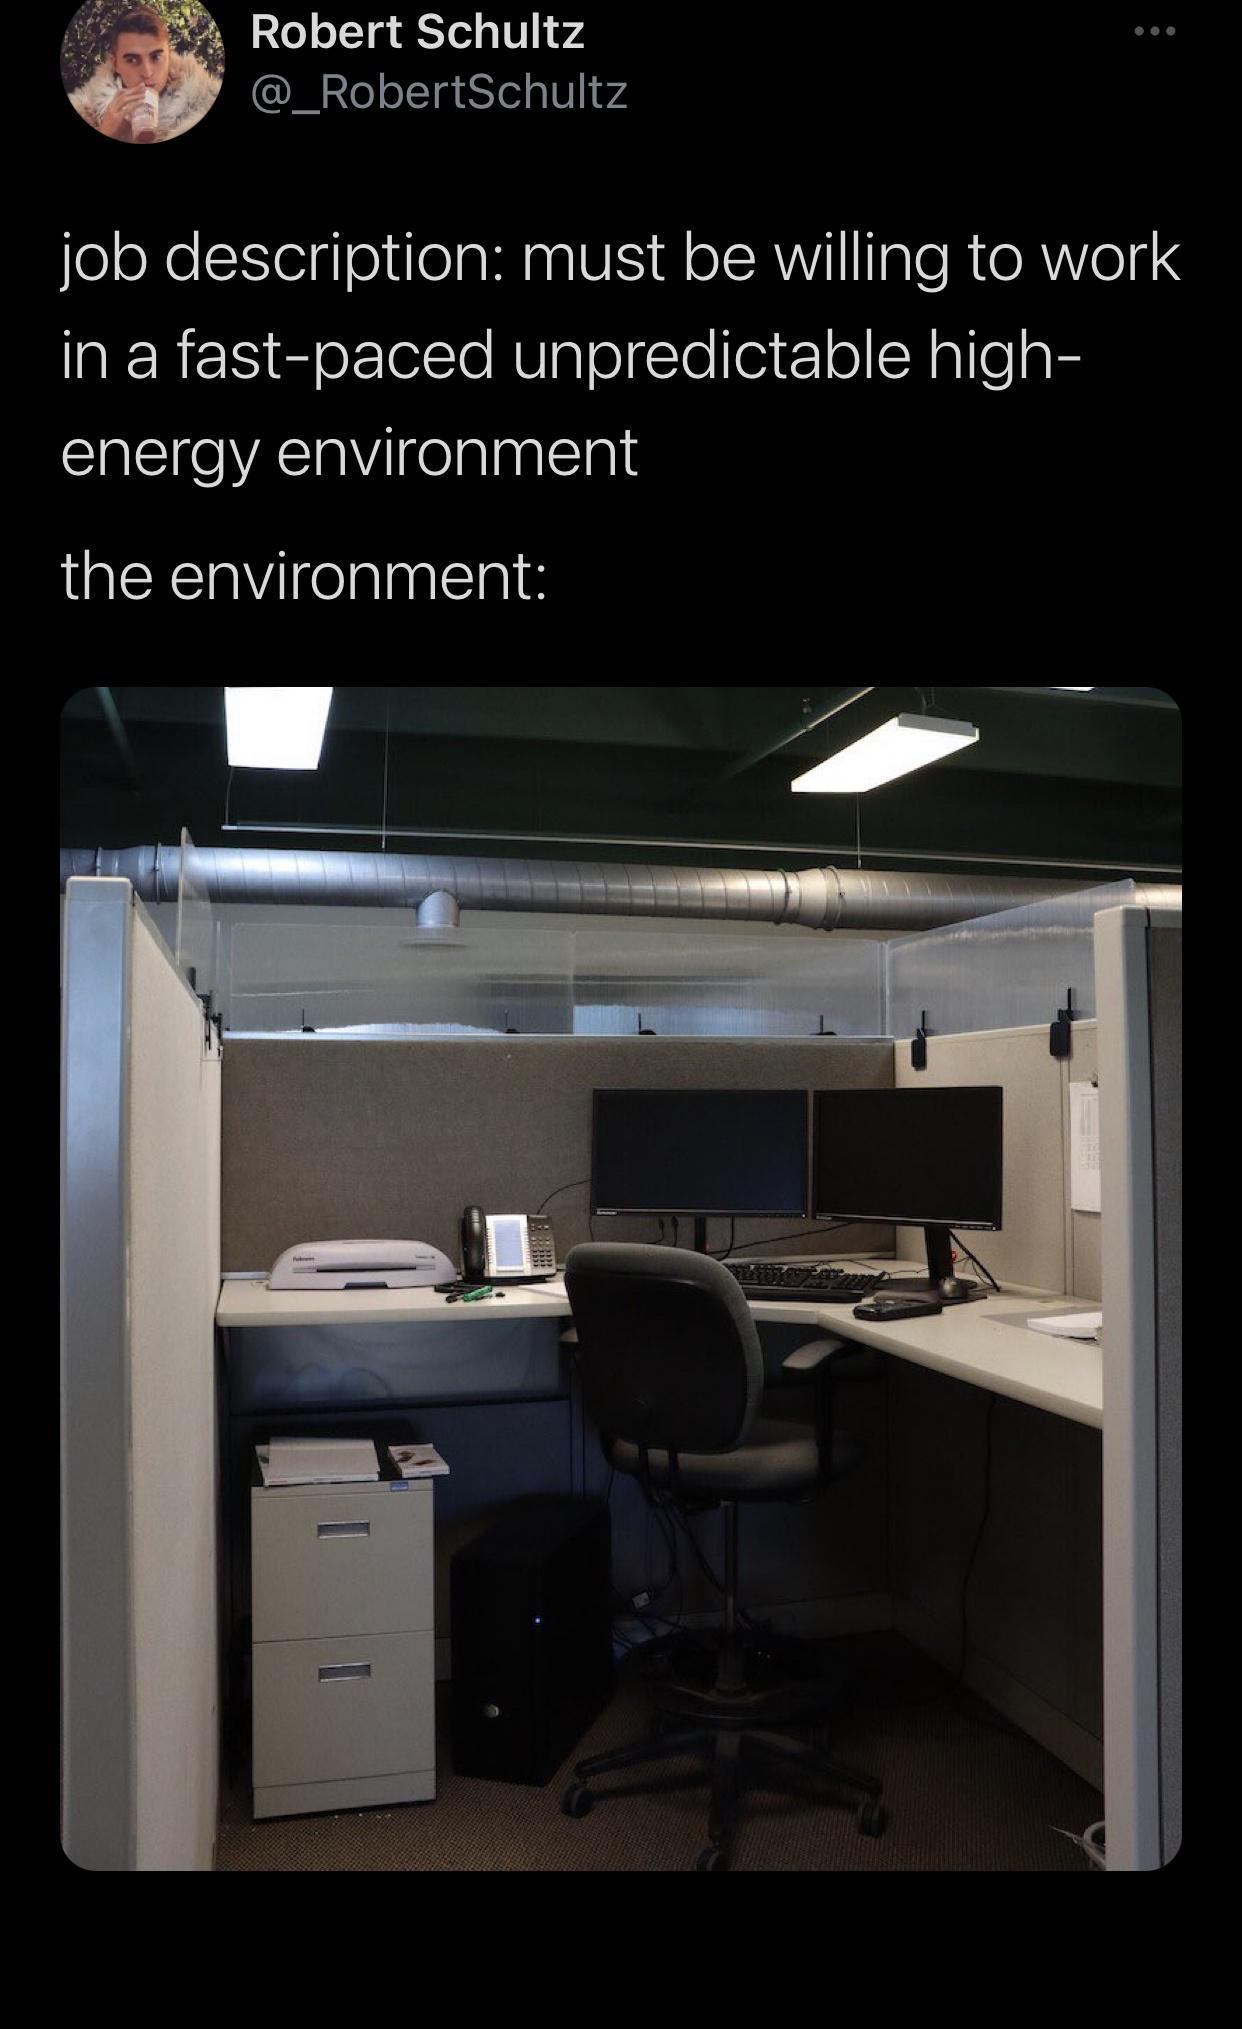 funny memes and pics - office culture meme - Robert Schultz job description must be willing to work in a fastpaced unpredictable high energy environment the environment